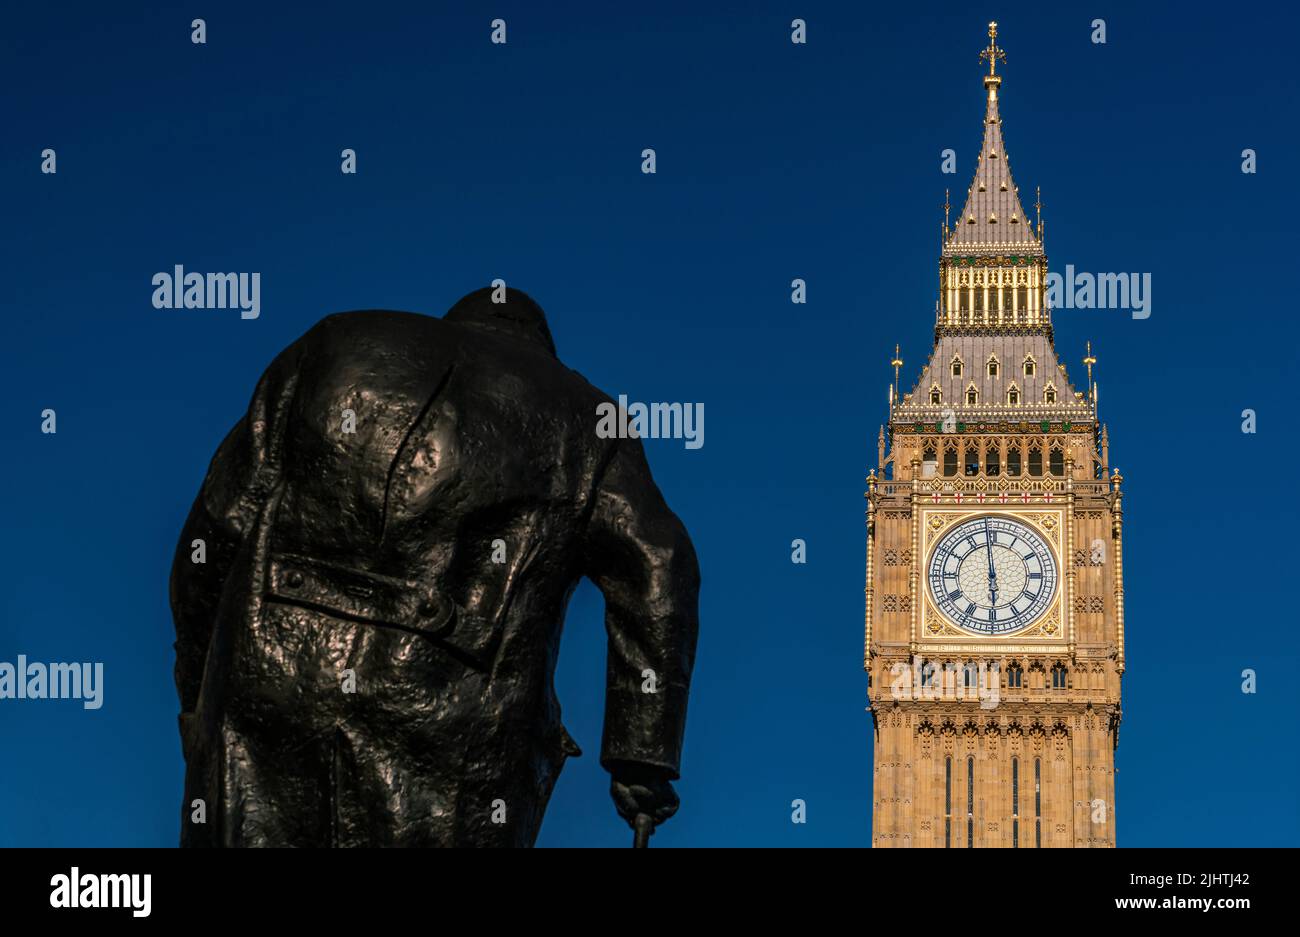 Big Ben, The Houses of Parliament and a rear view of the Winston Churchill statue in Parliament Square, Westminster, London, England Stock Photo